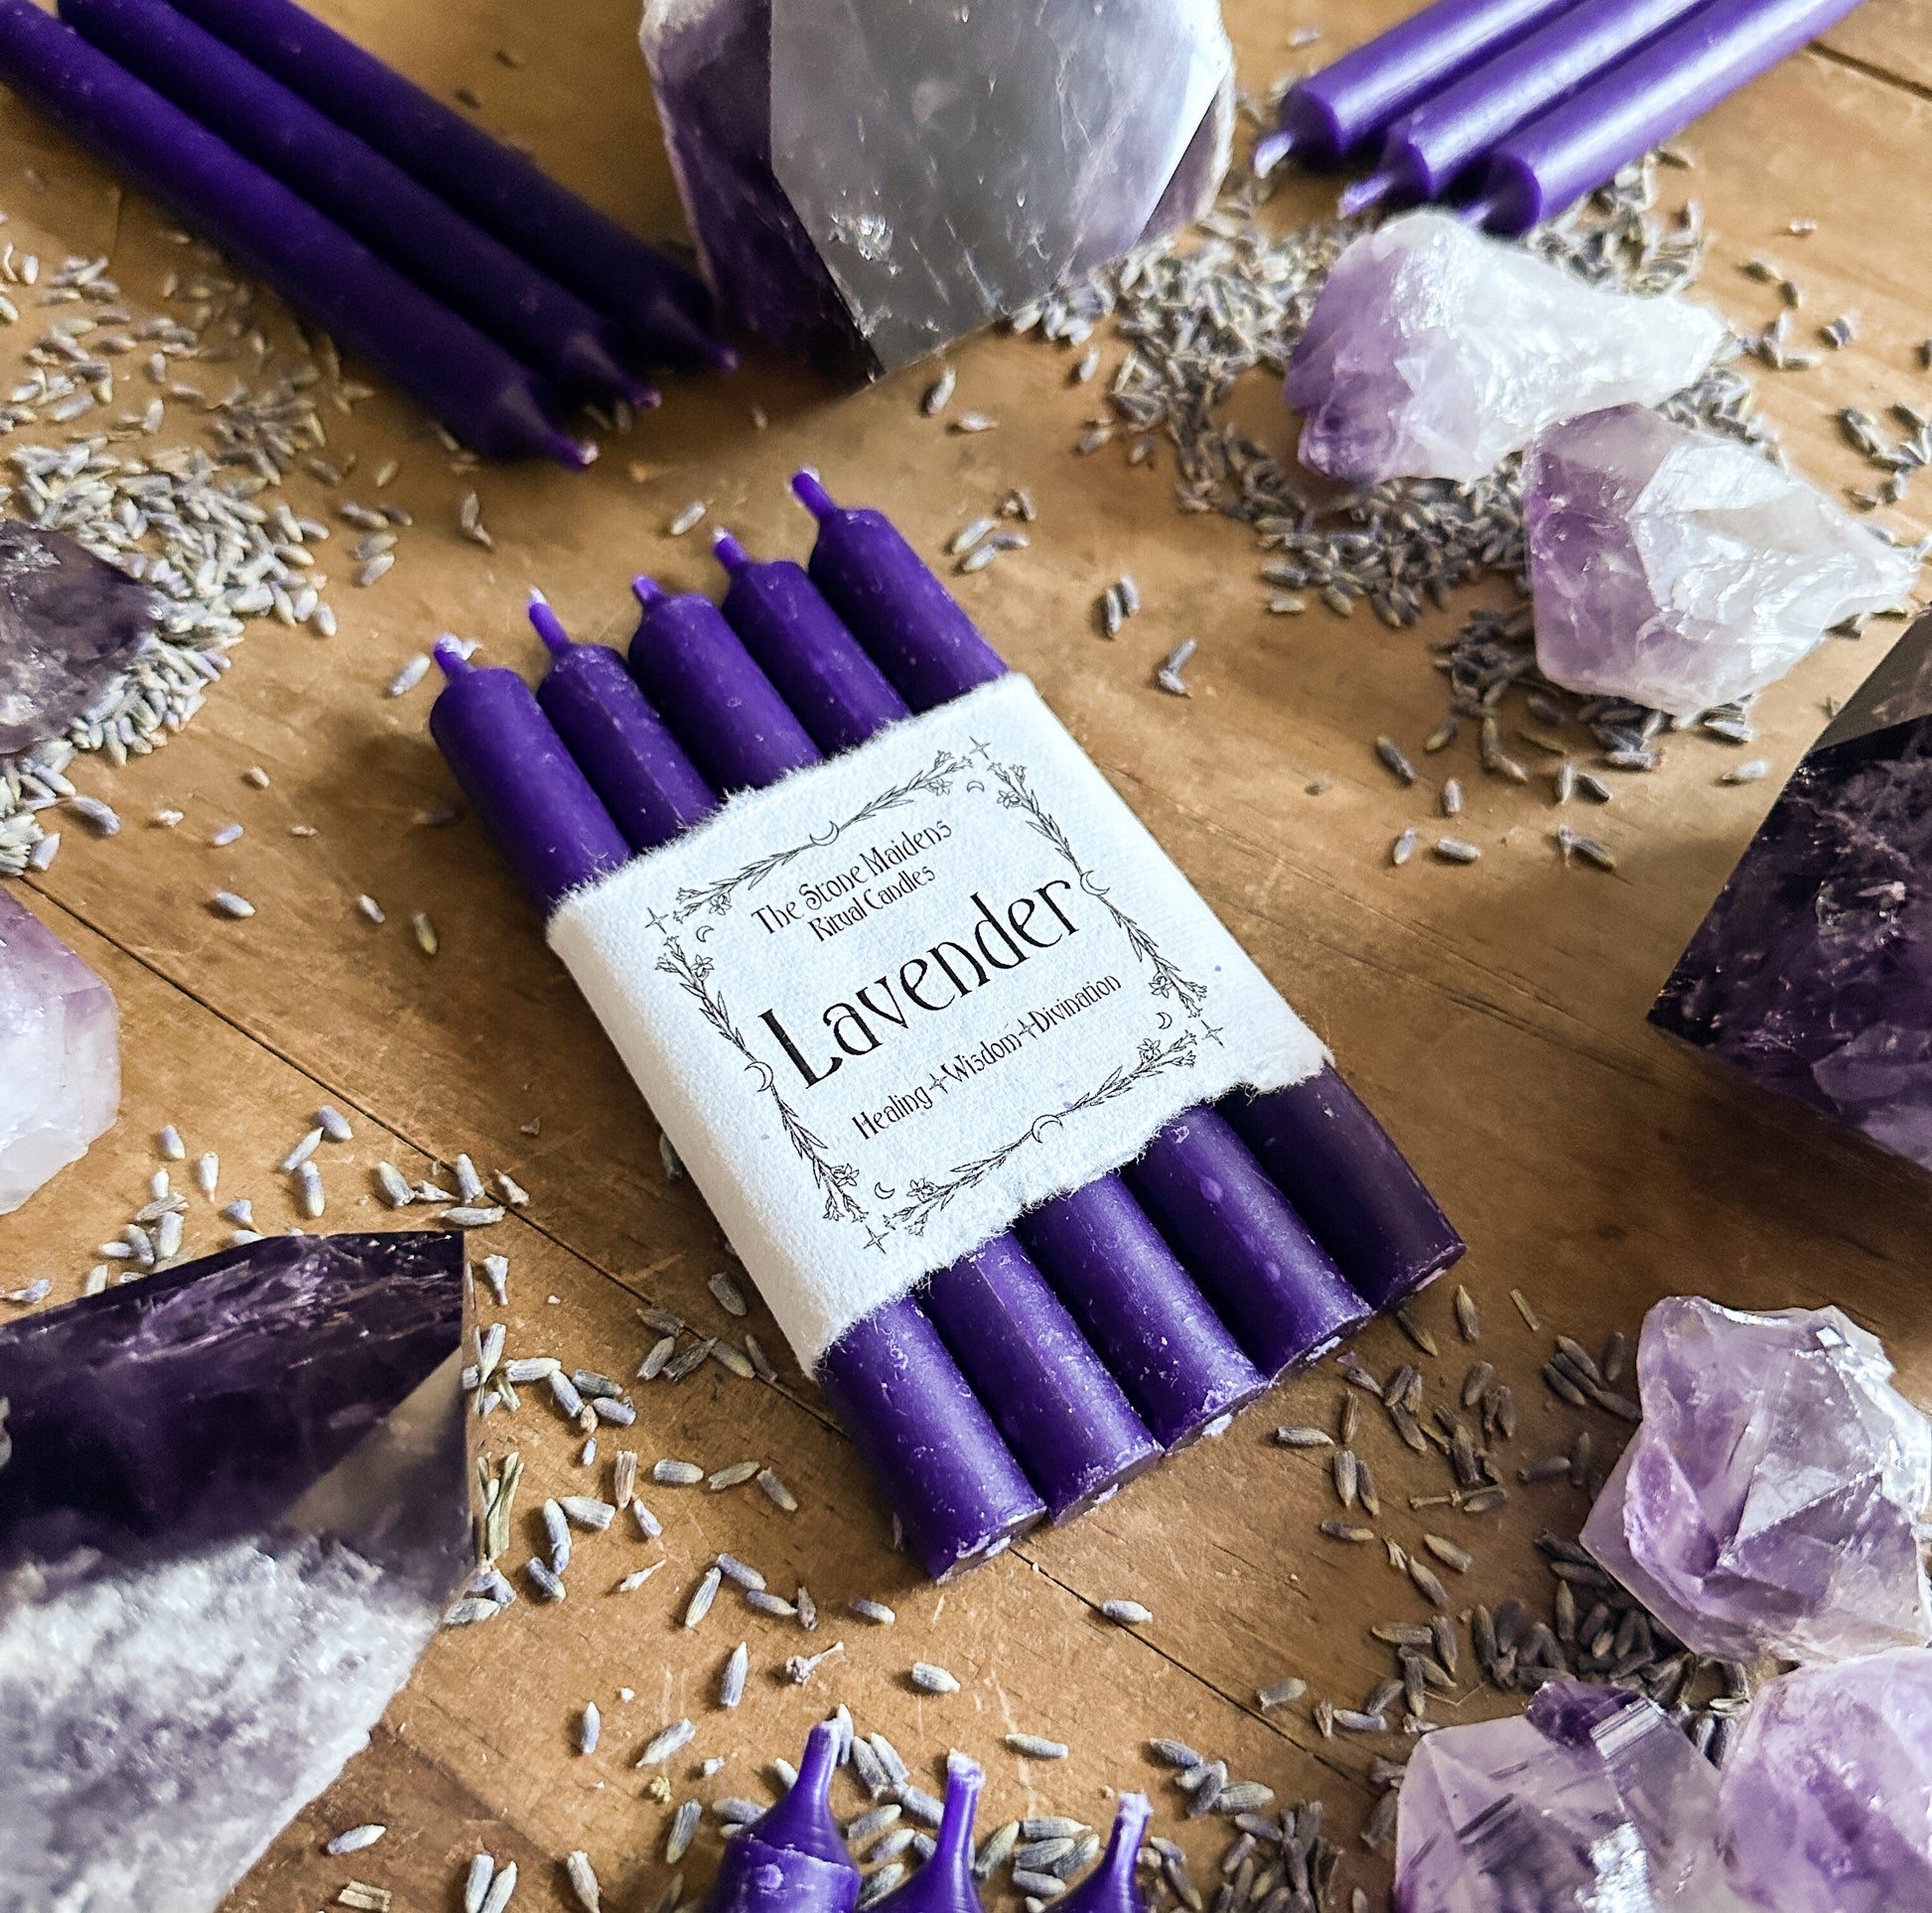 Dark Purple Lavender Spell Candles, Chime Candles sold in bulk at The Stone Maidens